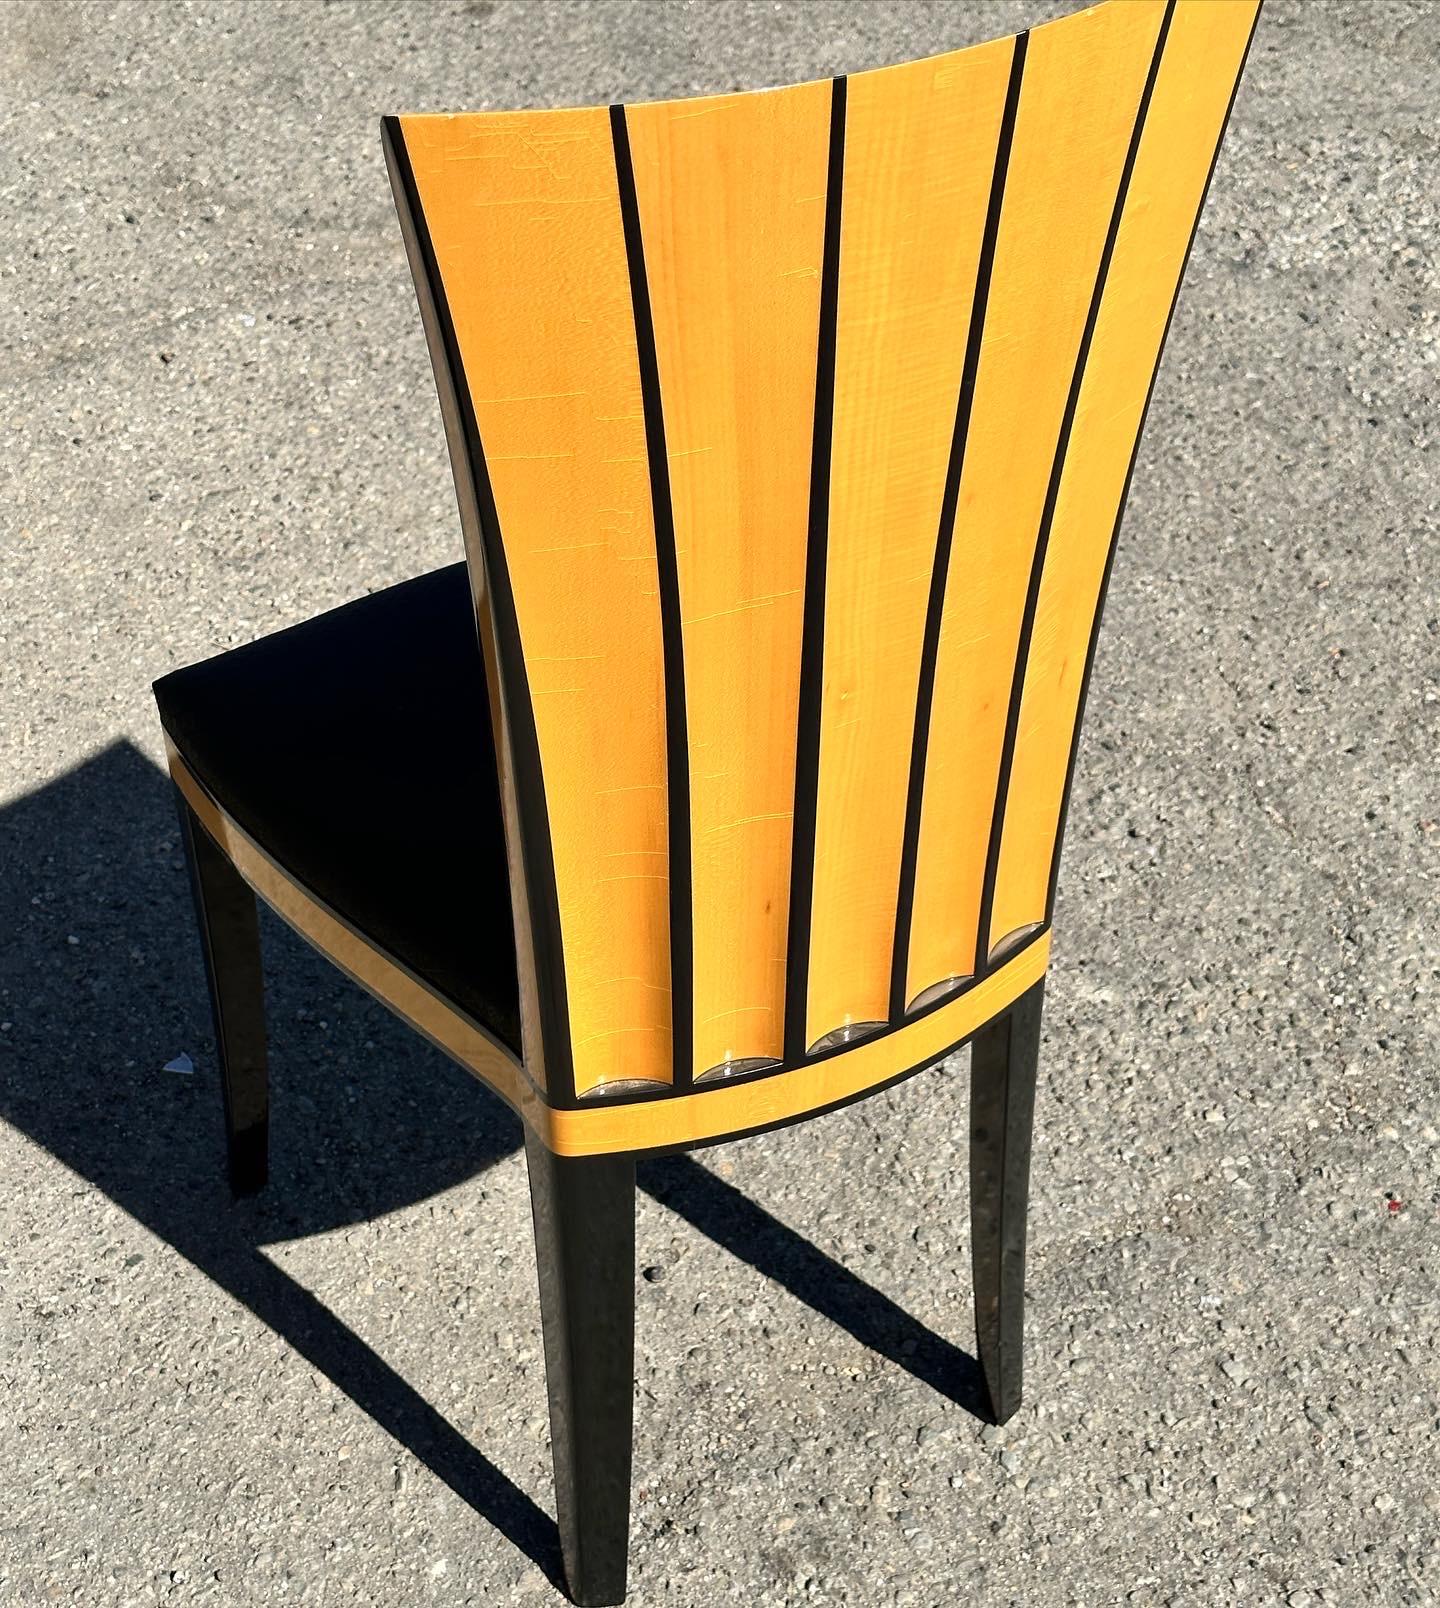 an incredible journey back in time where the integrity of materials blend with timeless craftsmanship. Fluted tall back dining chair . frame in solid wood with fine lacquer finish and tight woven horse hair fabric seat. Eliel Saarinen was a member